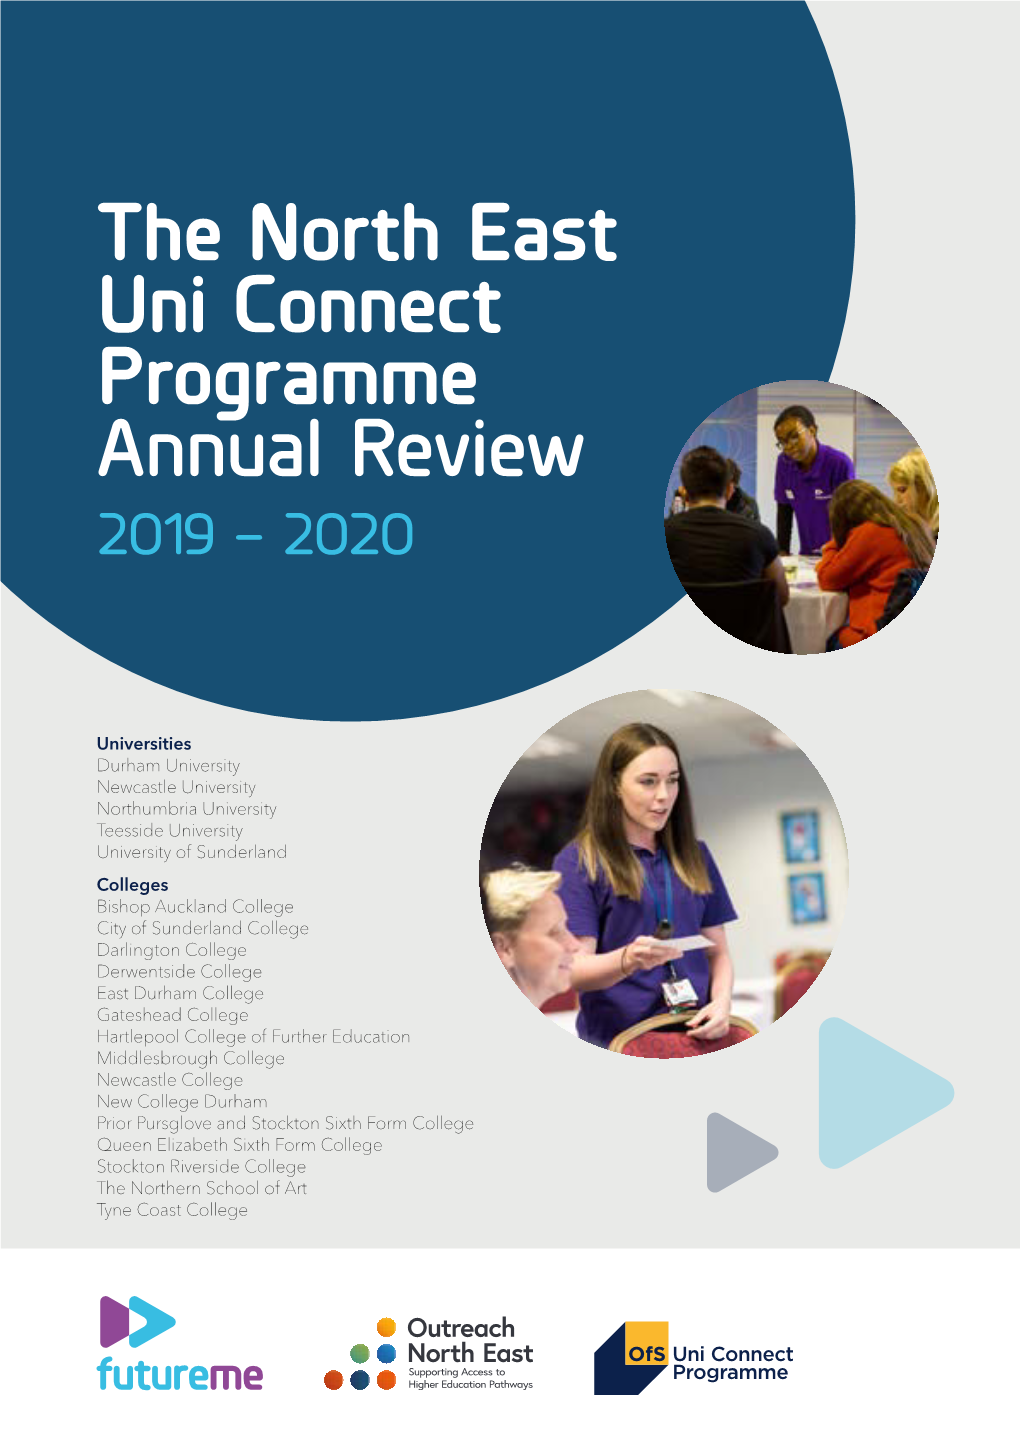 The North East Uni Connect Programme Annual Review 2019 – 2020